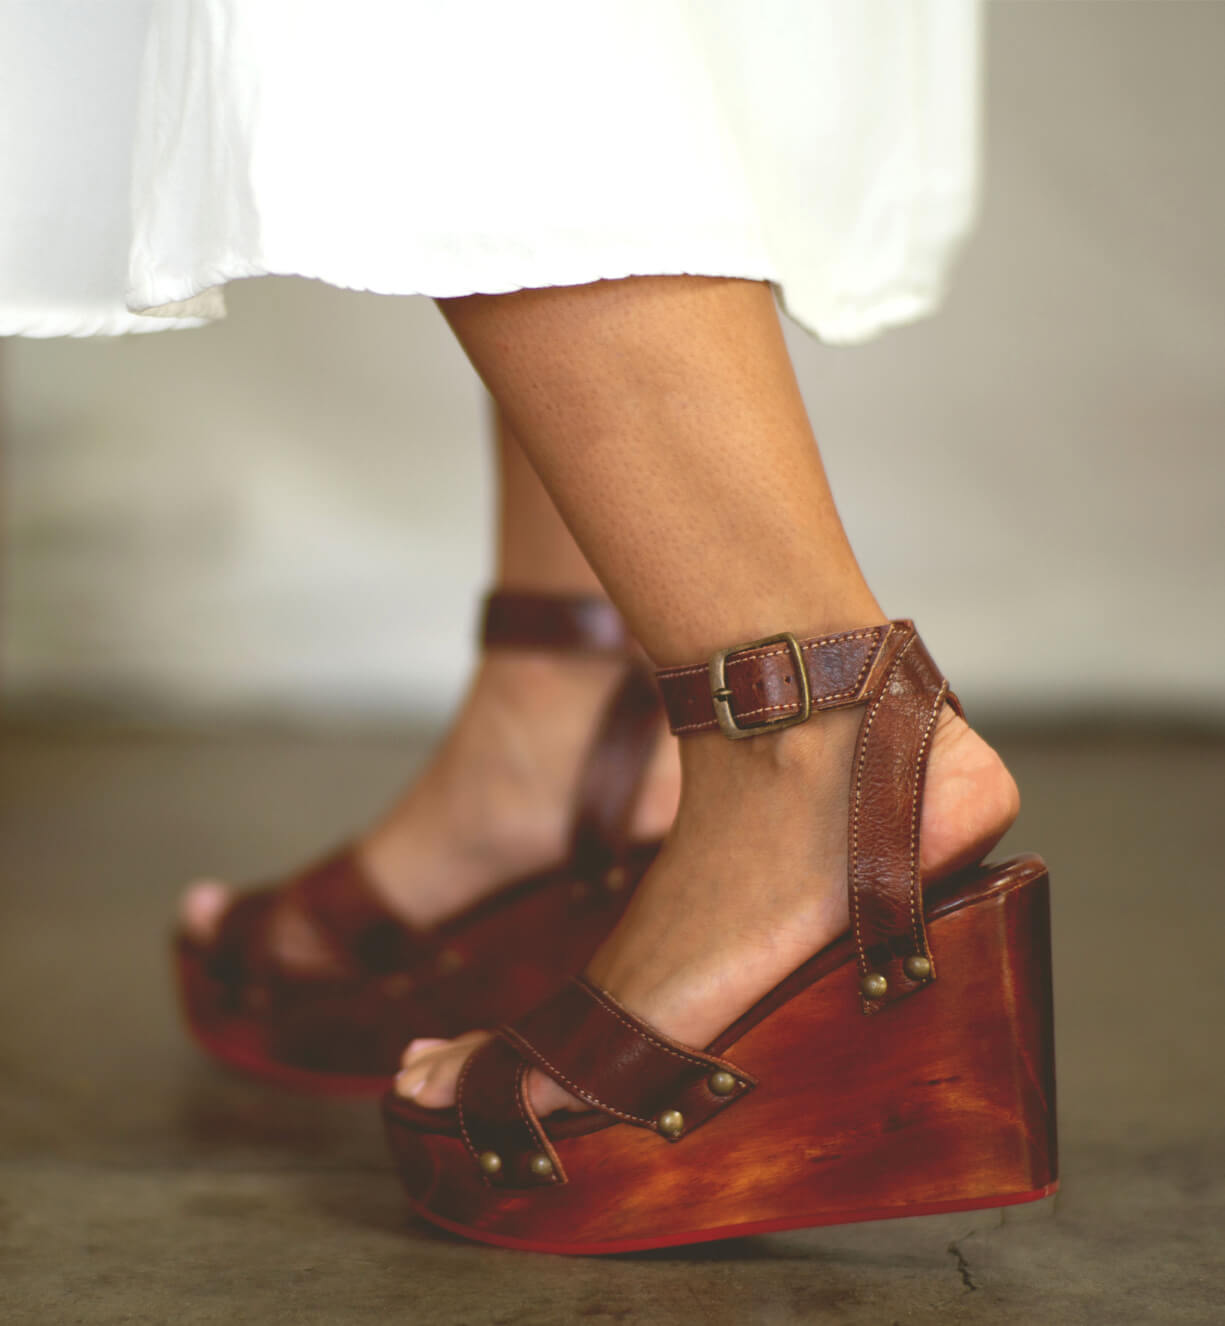 A woman's feet in a pair of Bed Stu Grettell brown wedge sandals.